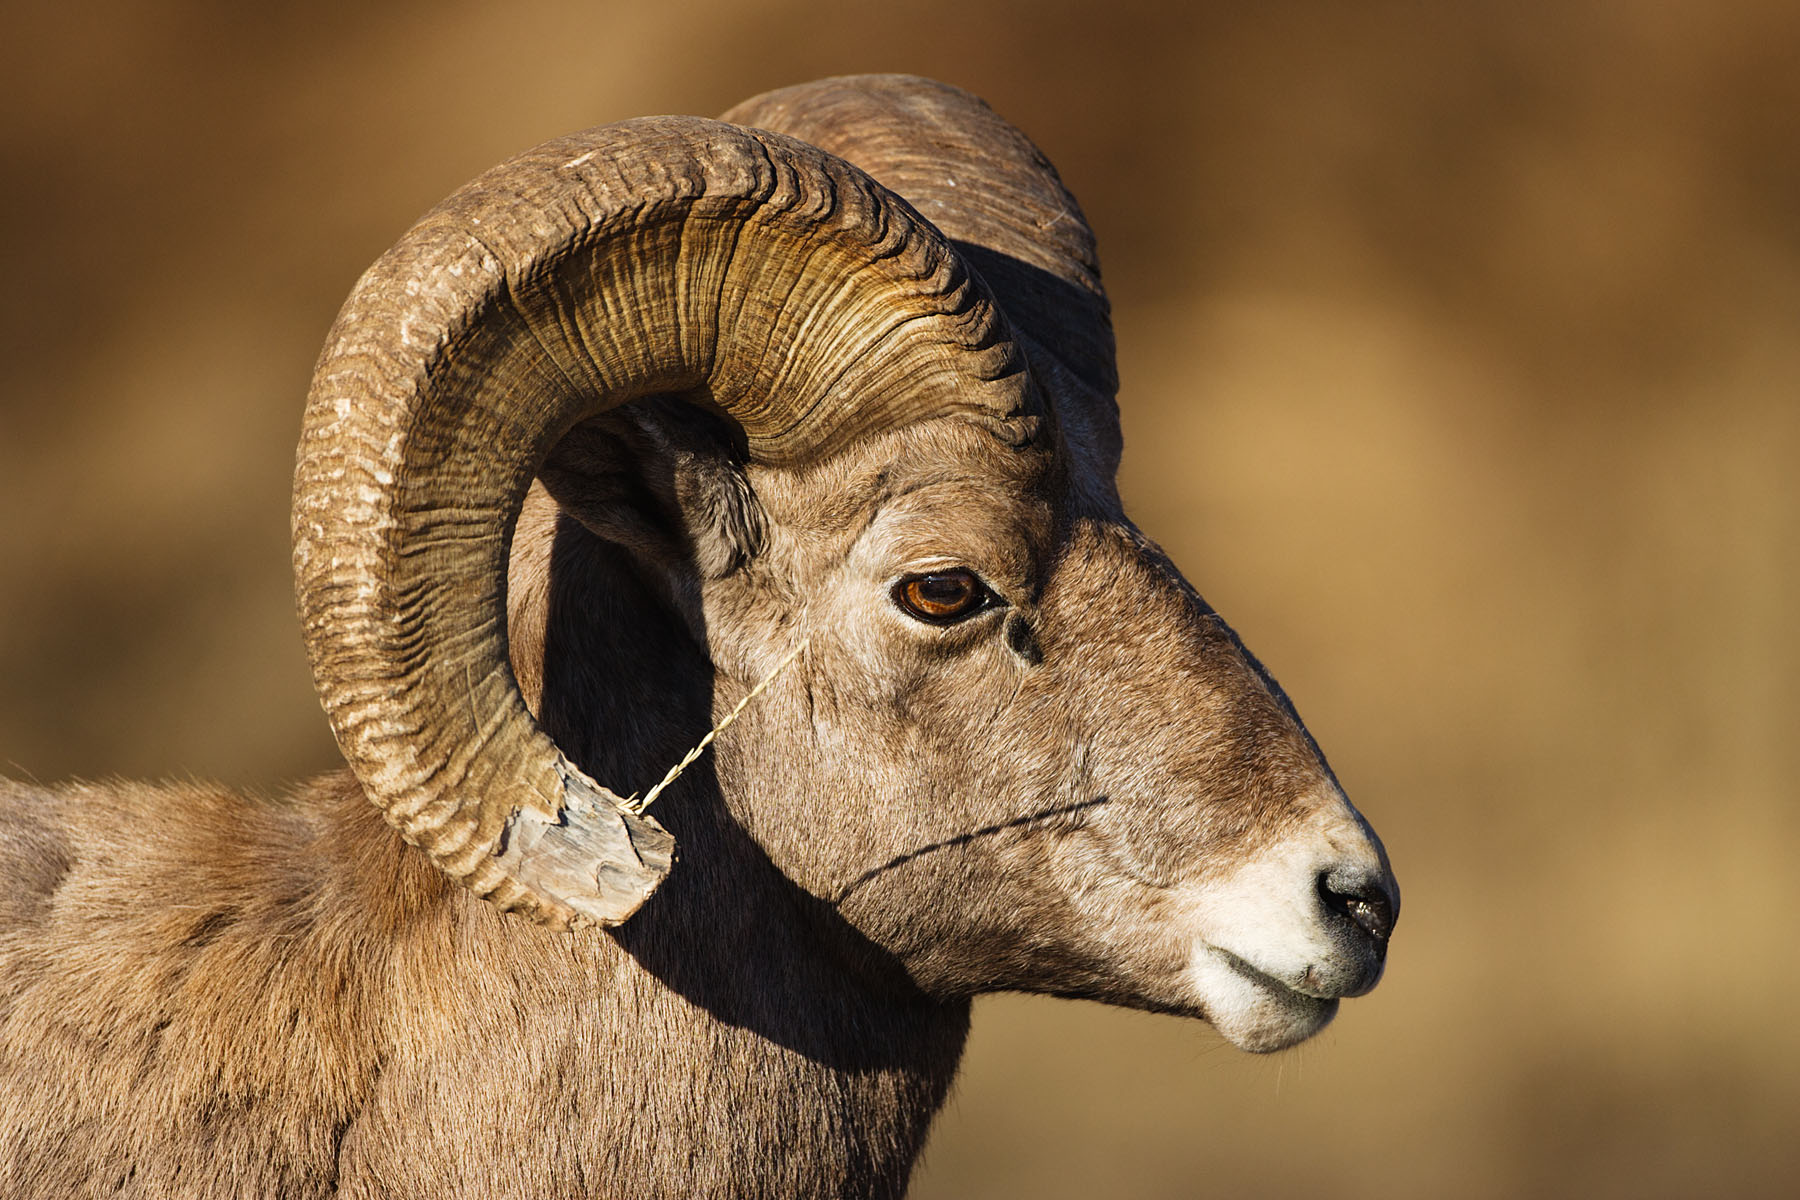 Rocky Mountain Bighorn with grass stuck in his horn, Cleghorn State Fish Hatchery, SD.  Click for next photo.